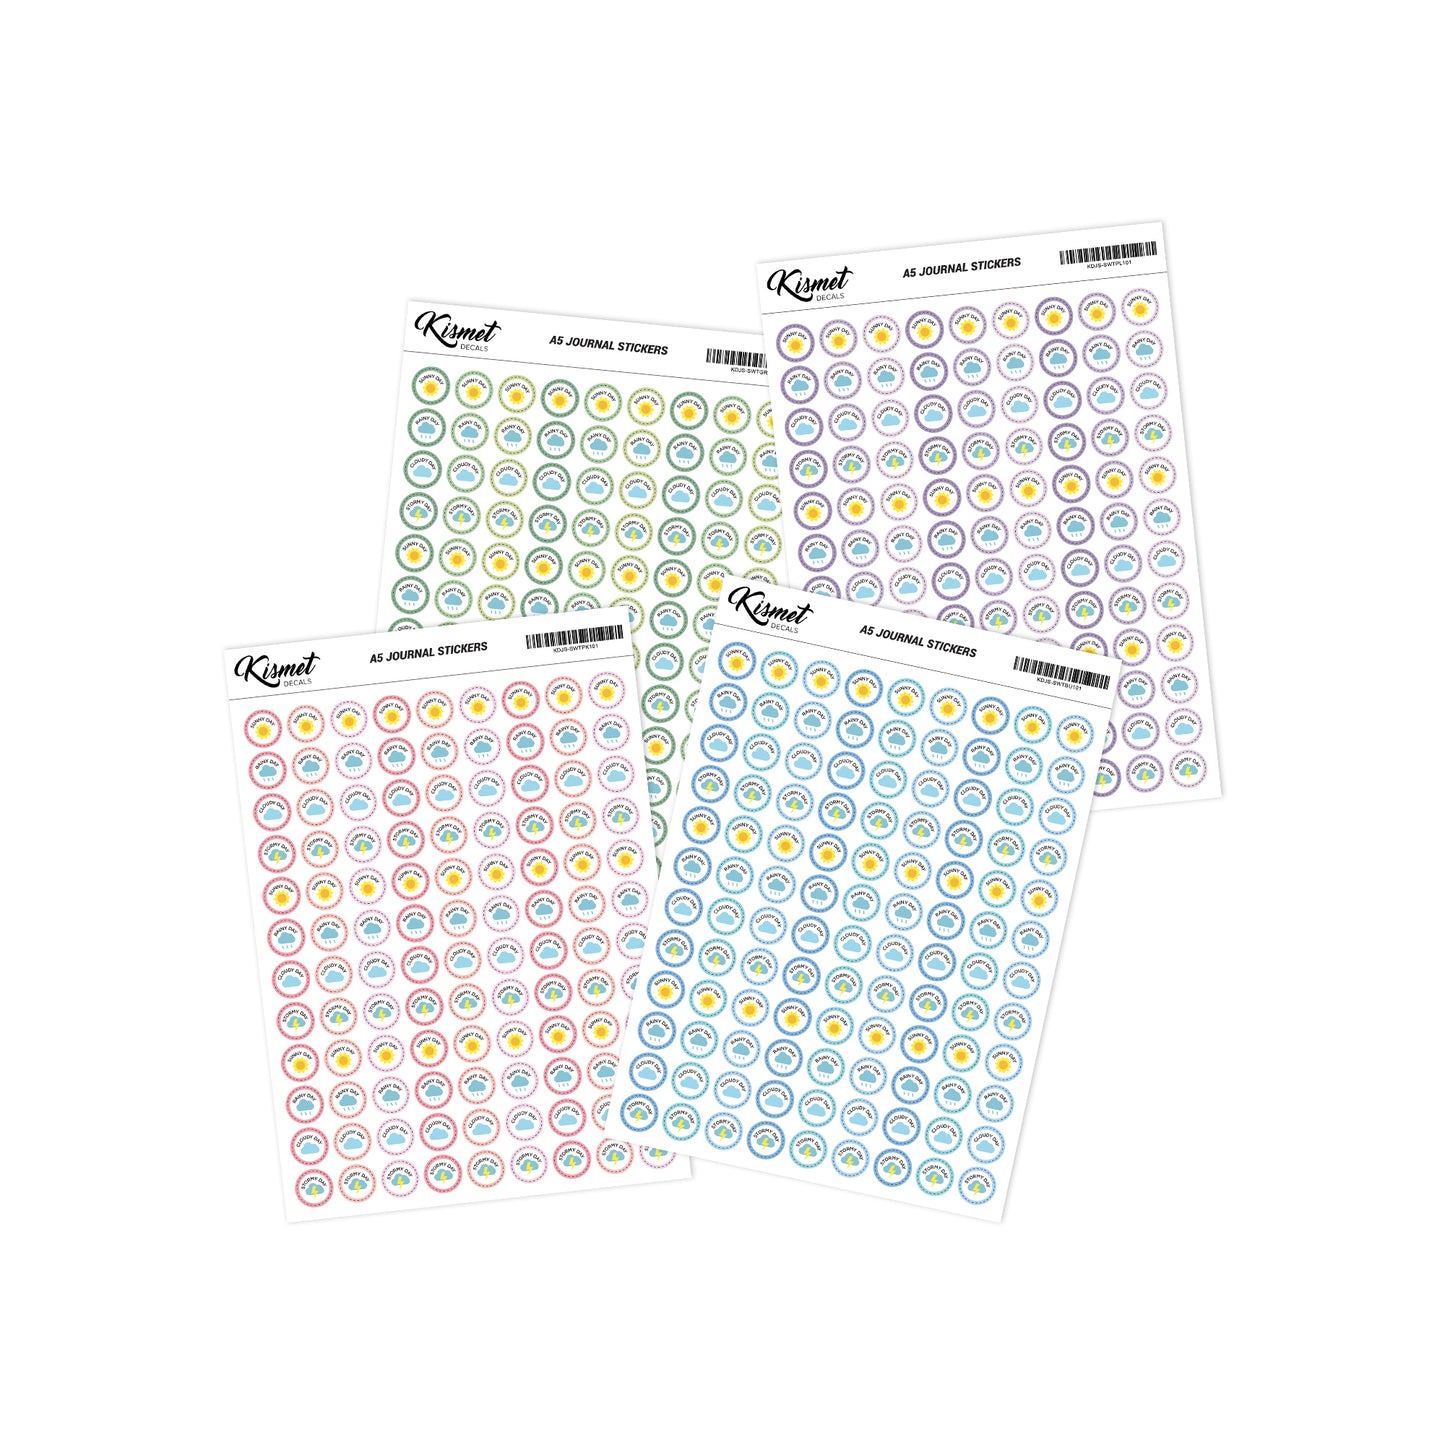 A5 Solid Number Stickers - 5.3 X 8.3 - Craft Journal Snail Mail Plan